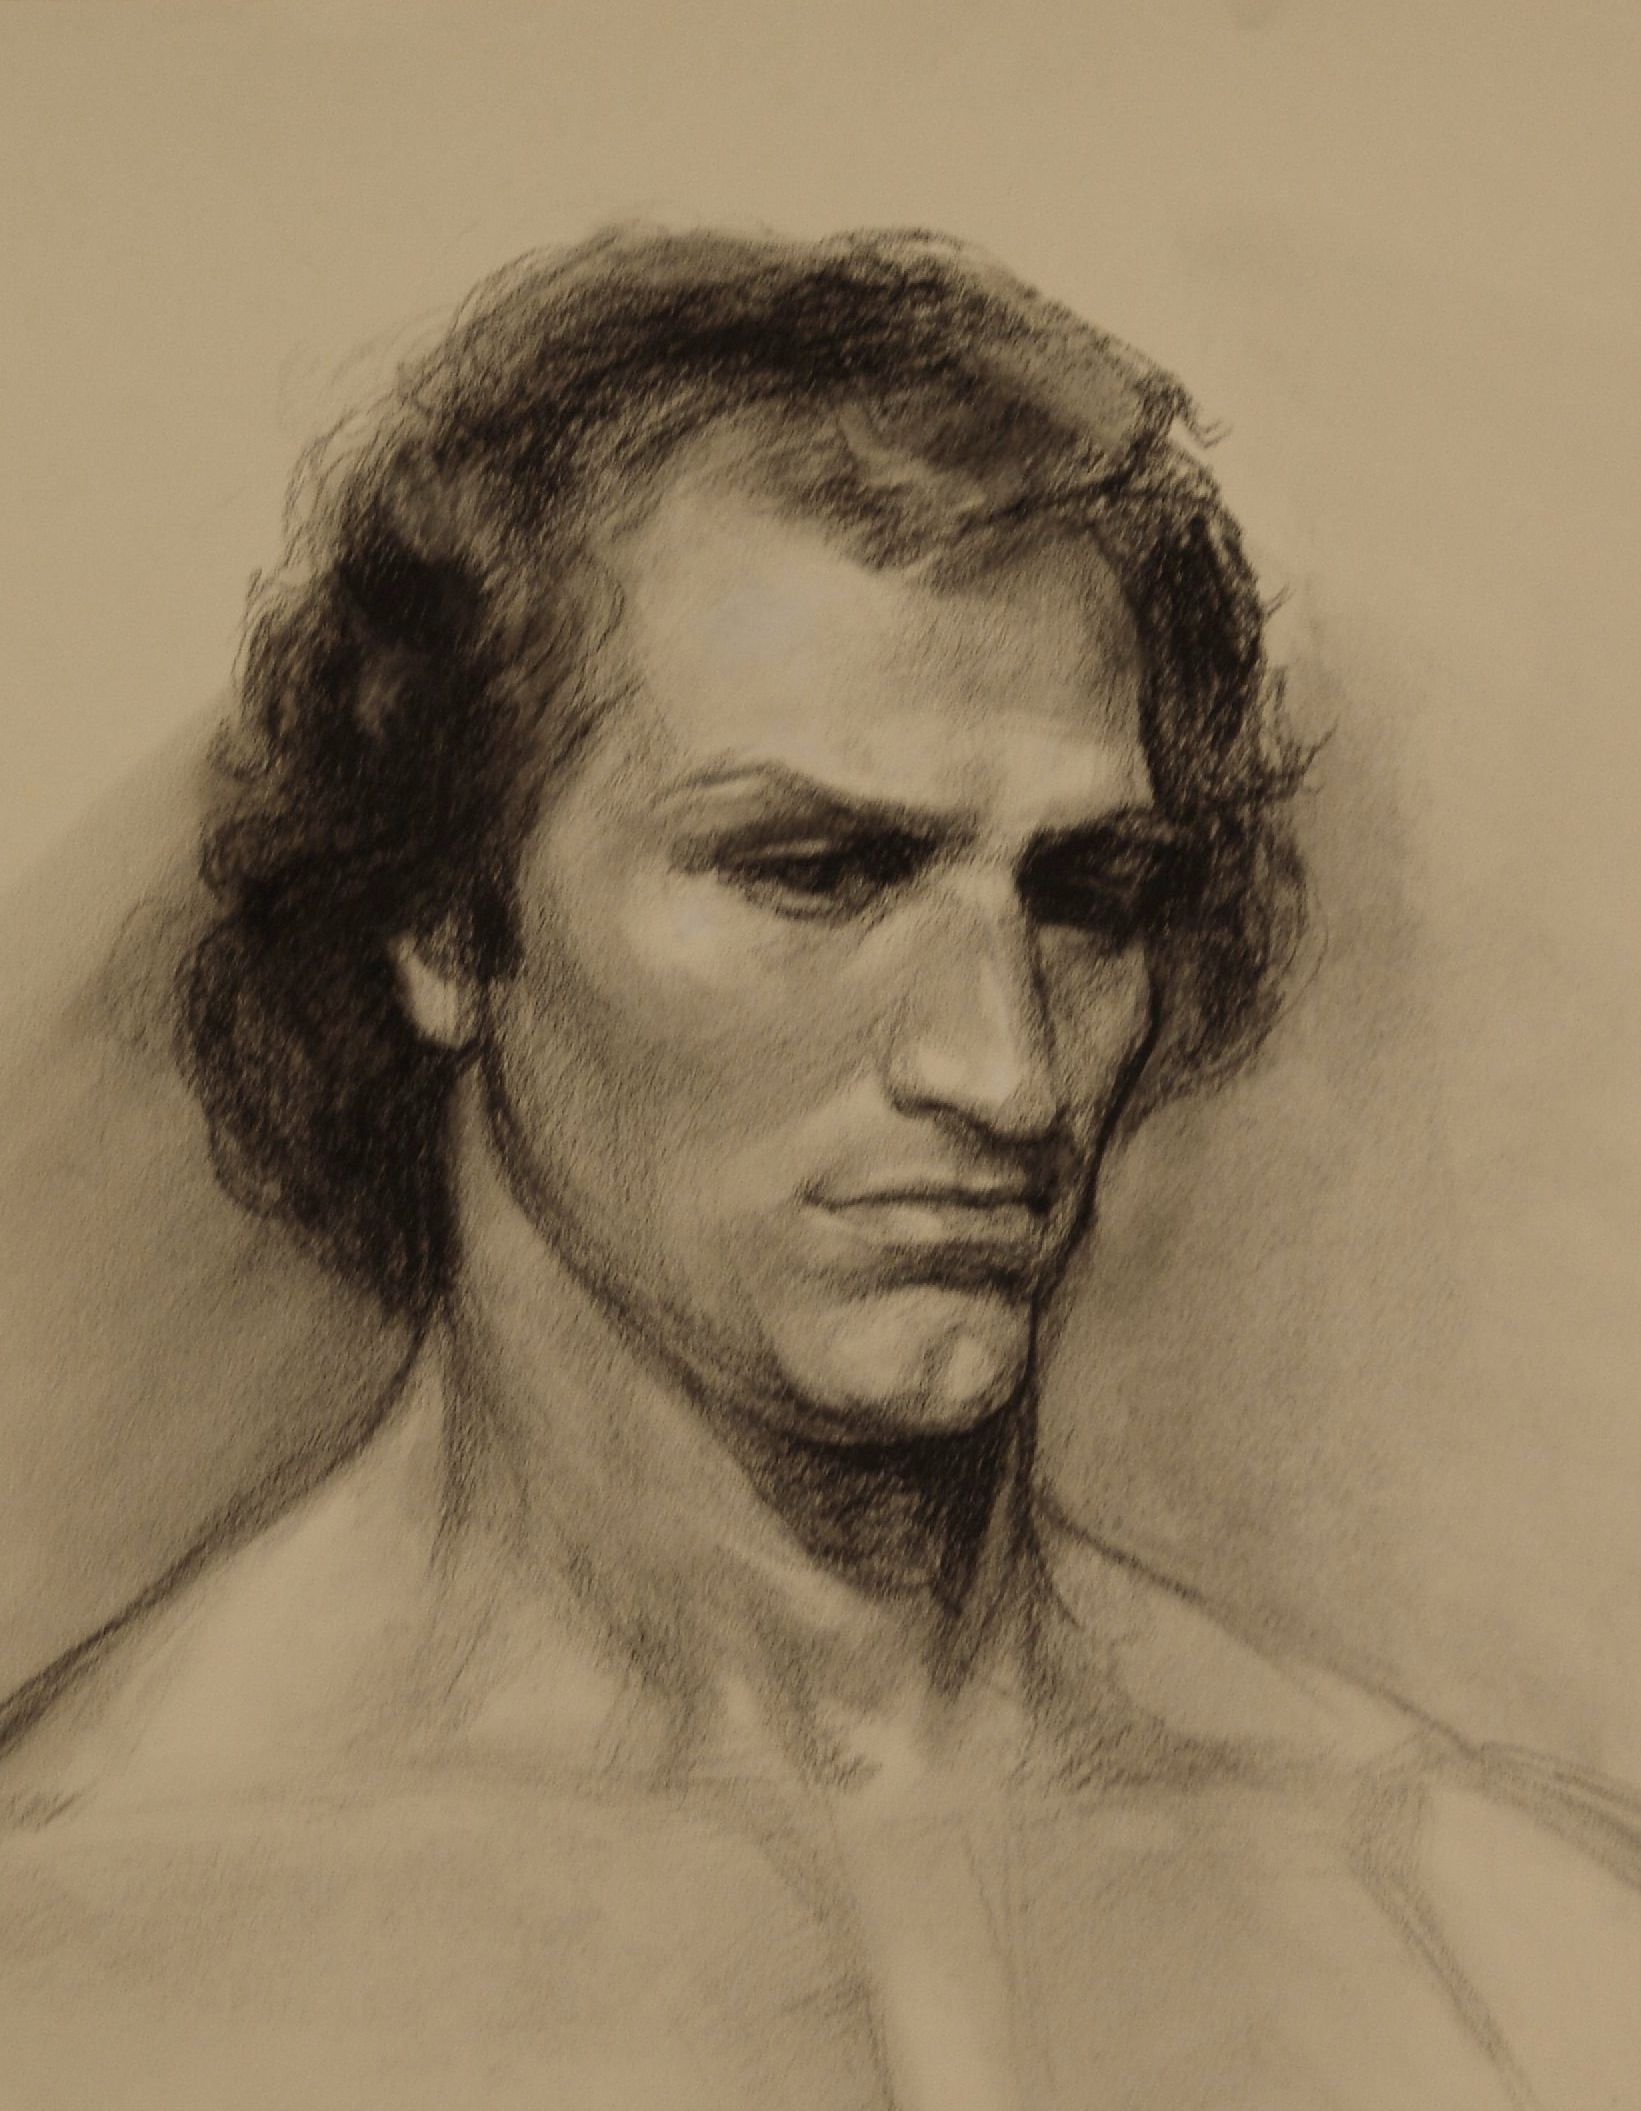 Pondering, Charcoal, 16 x 13 inches